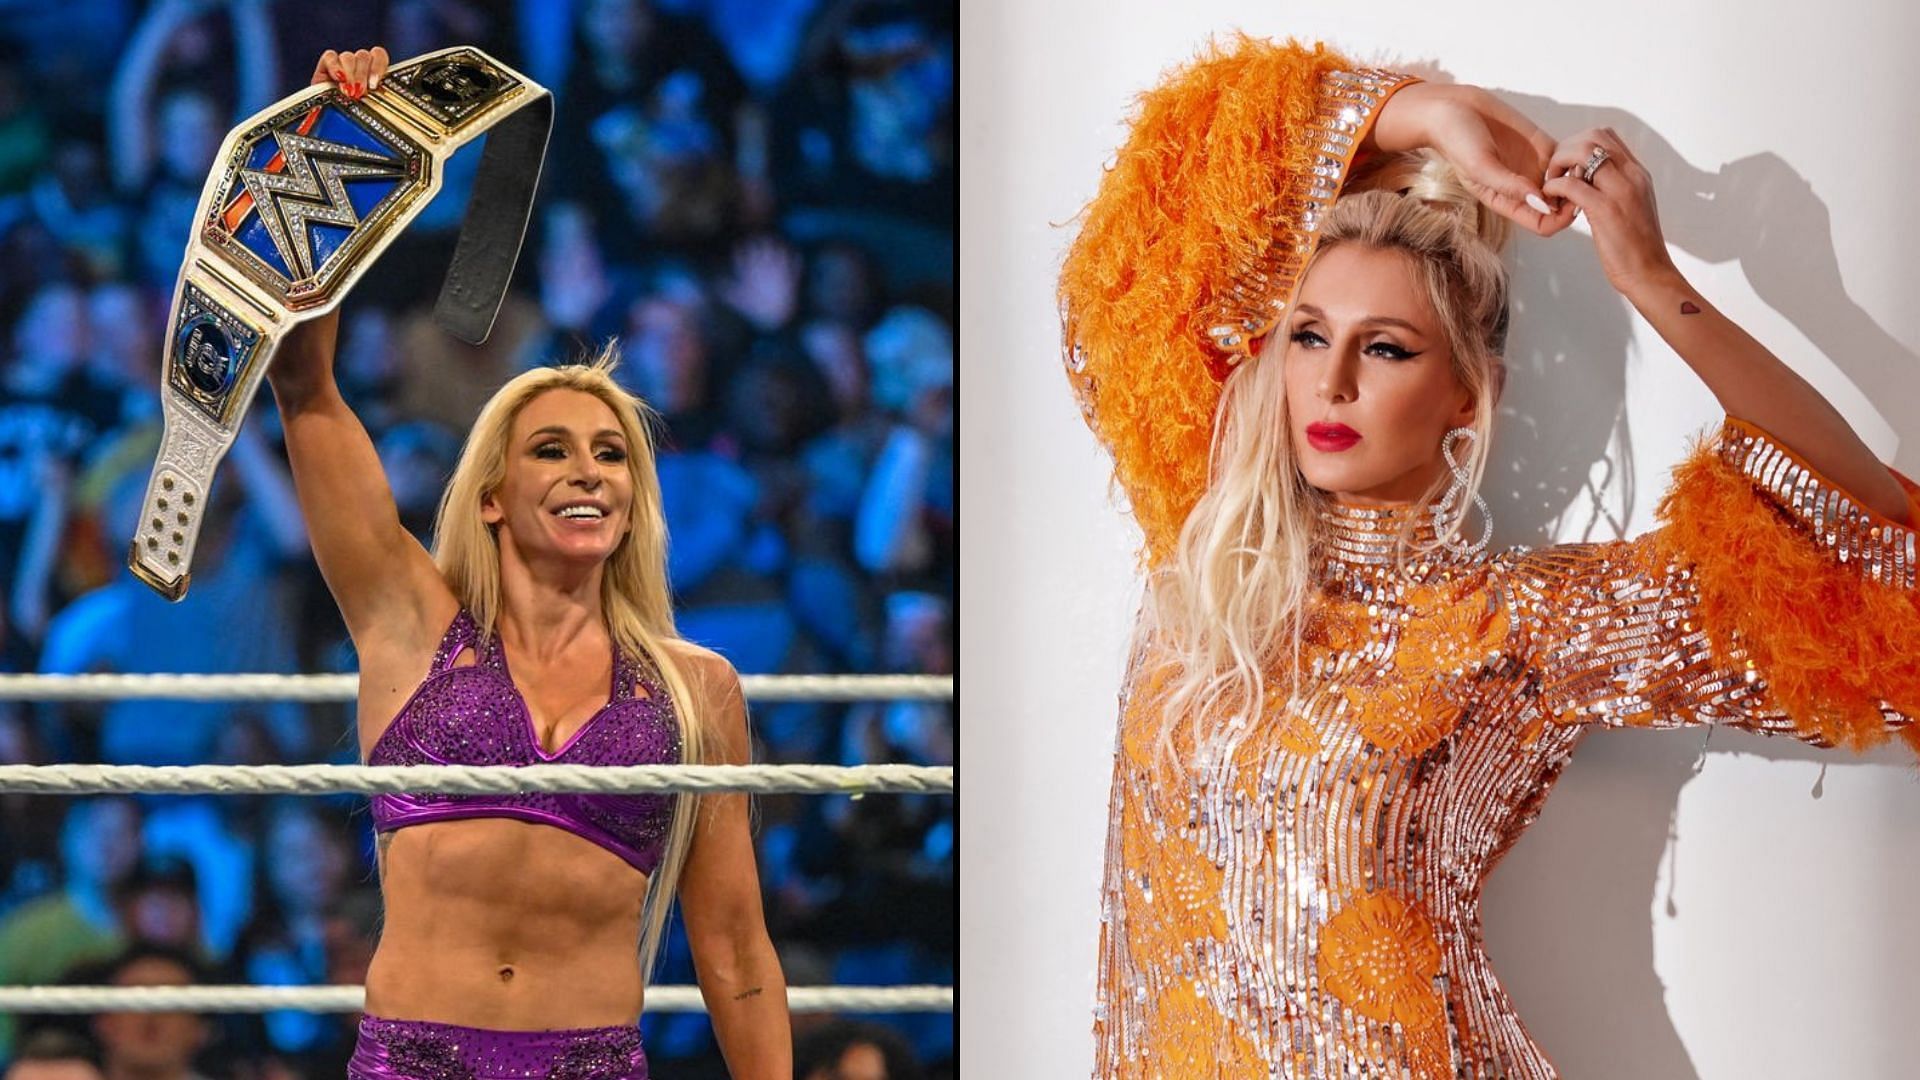 Charlotte Flair is the current SmackDown Women